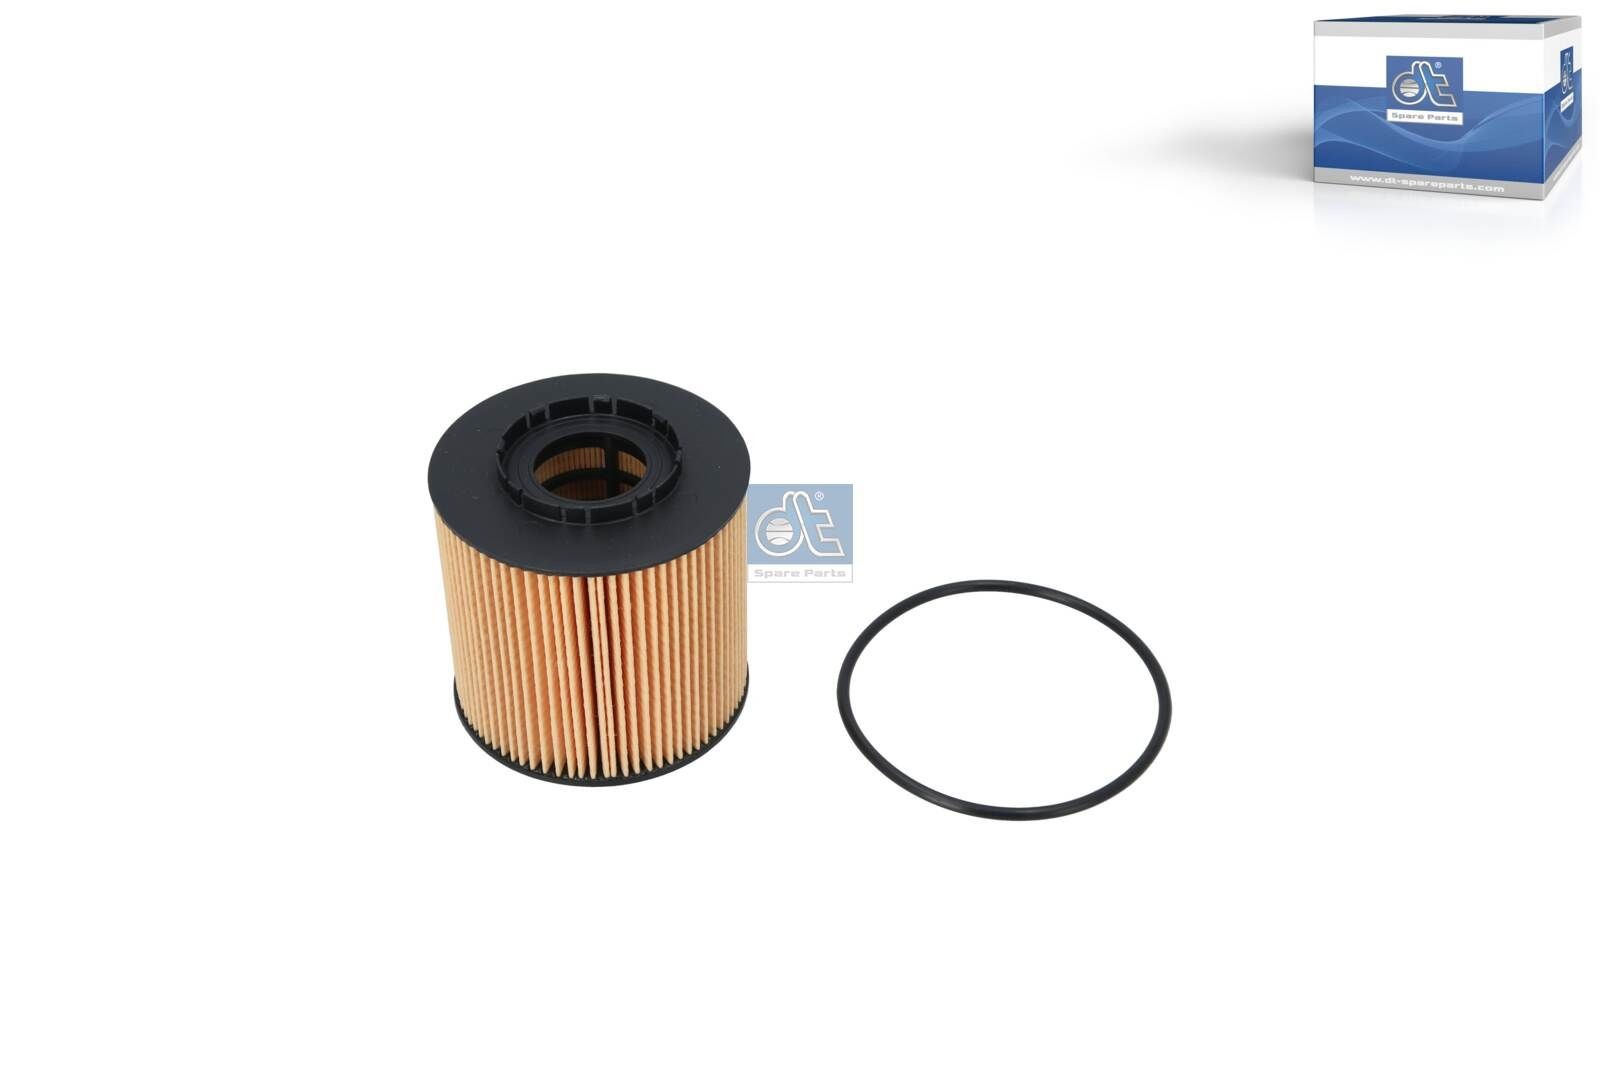 Original DT Spare Parts E64H D96 Oil filters 6.24211 for OPEL OMEGA